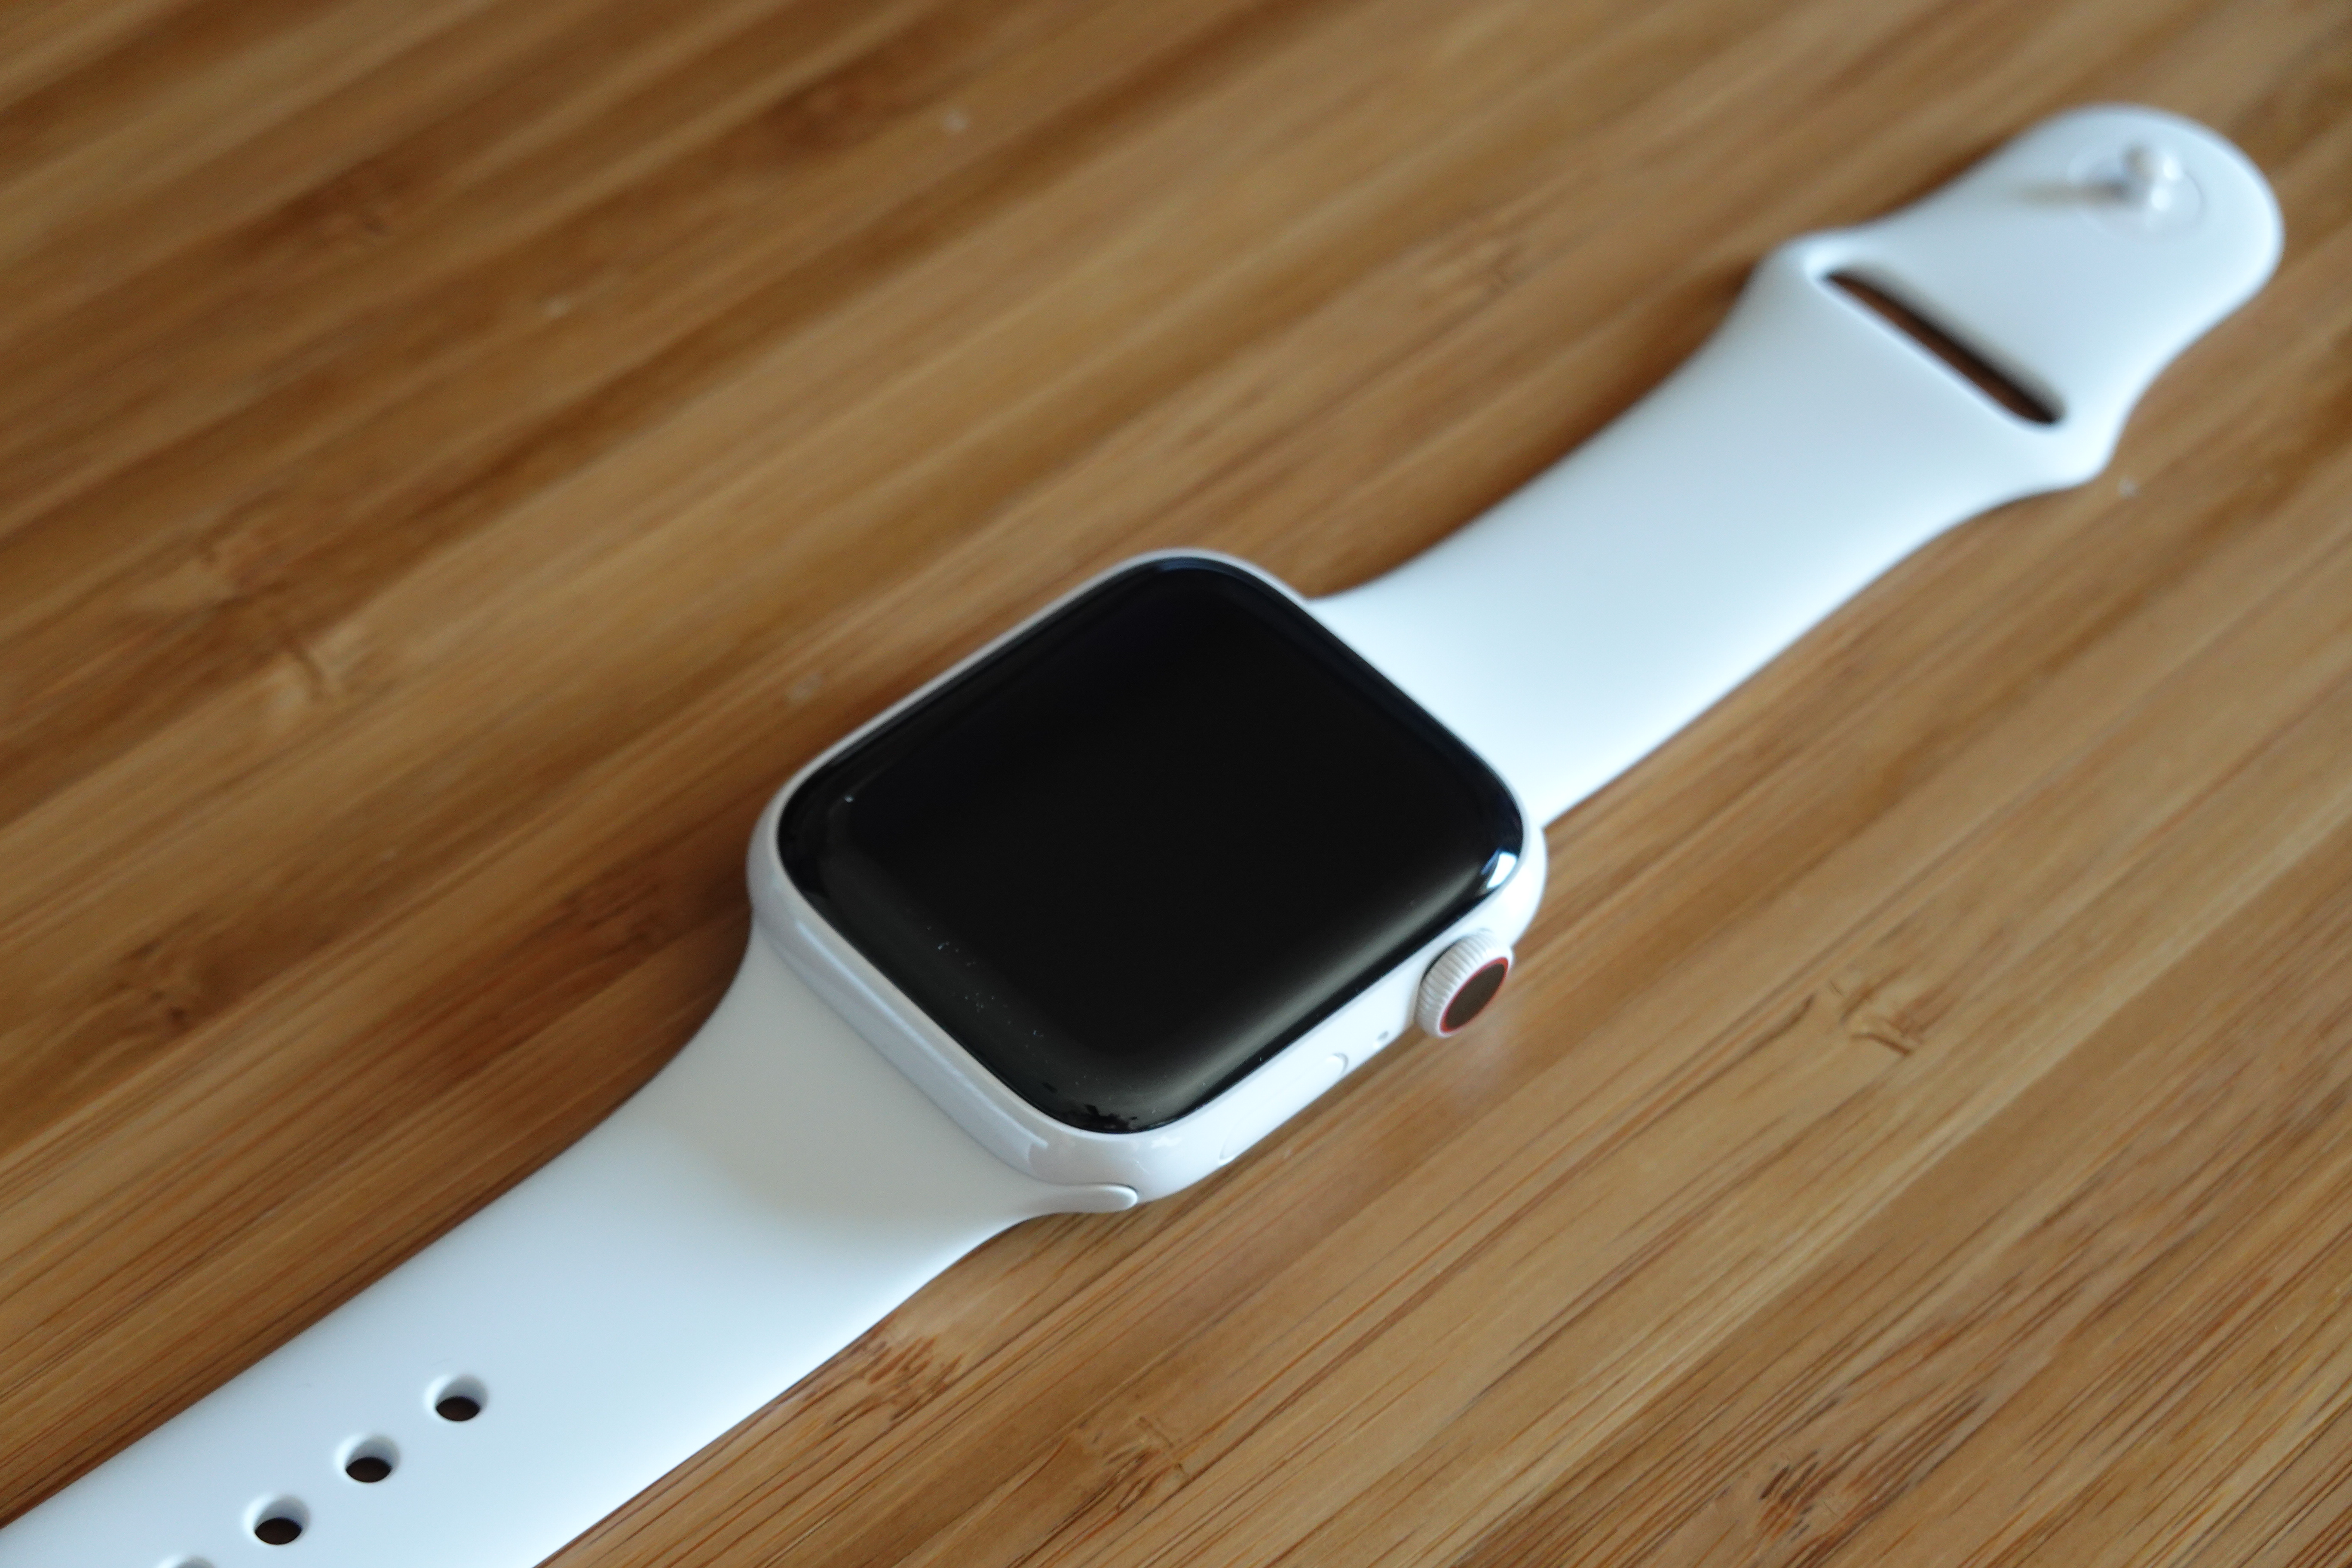 Apple Watch Edition: Hands-on with the redesigned white ceramic